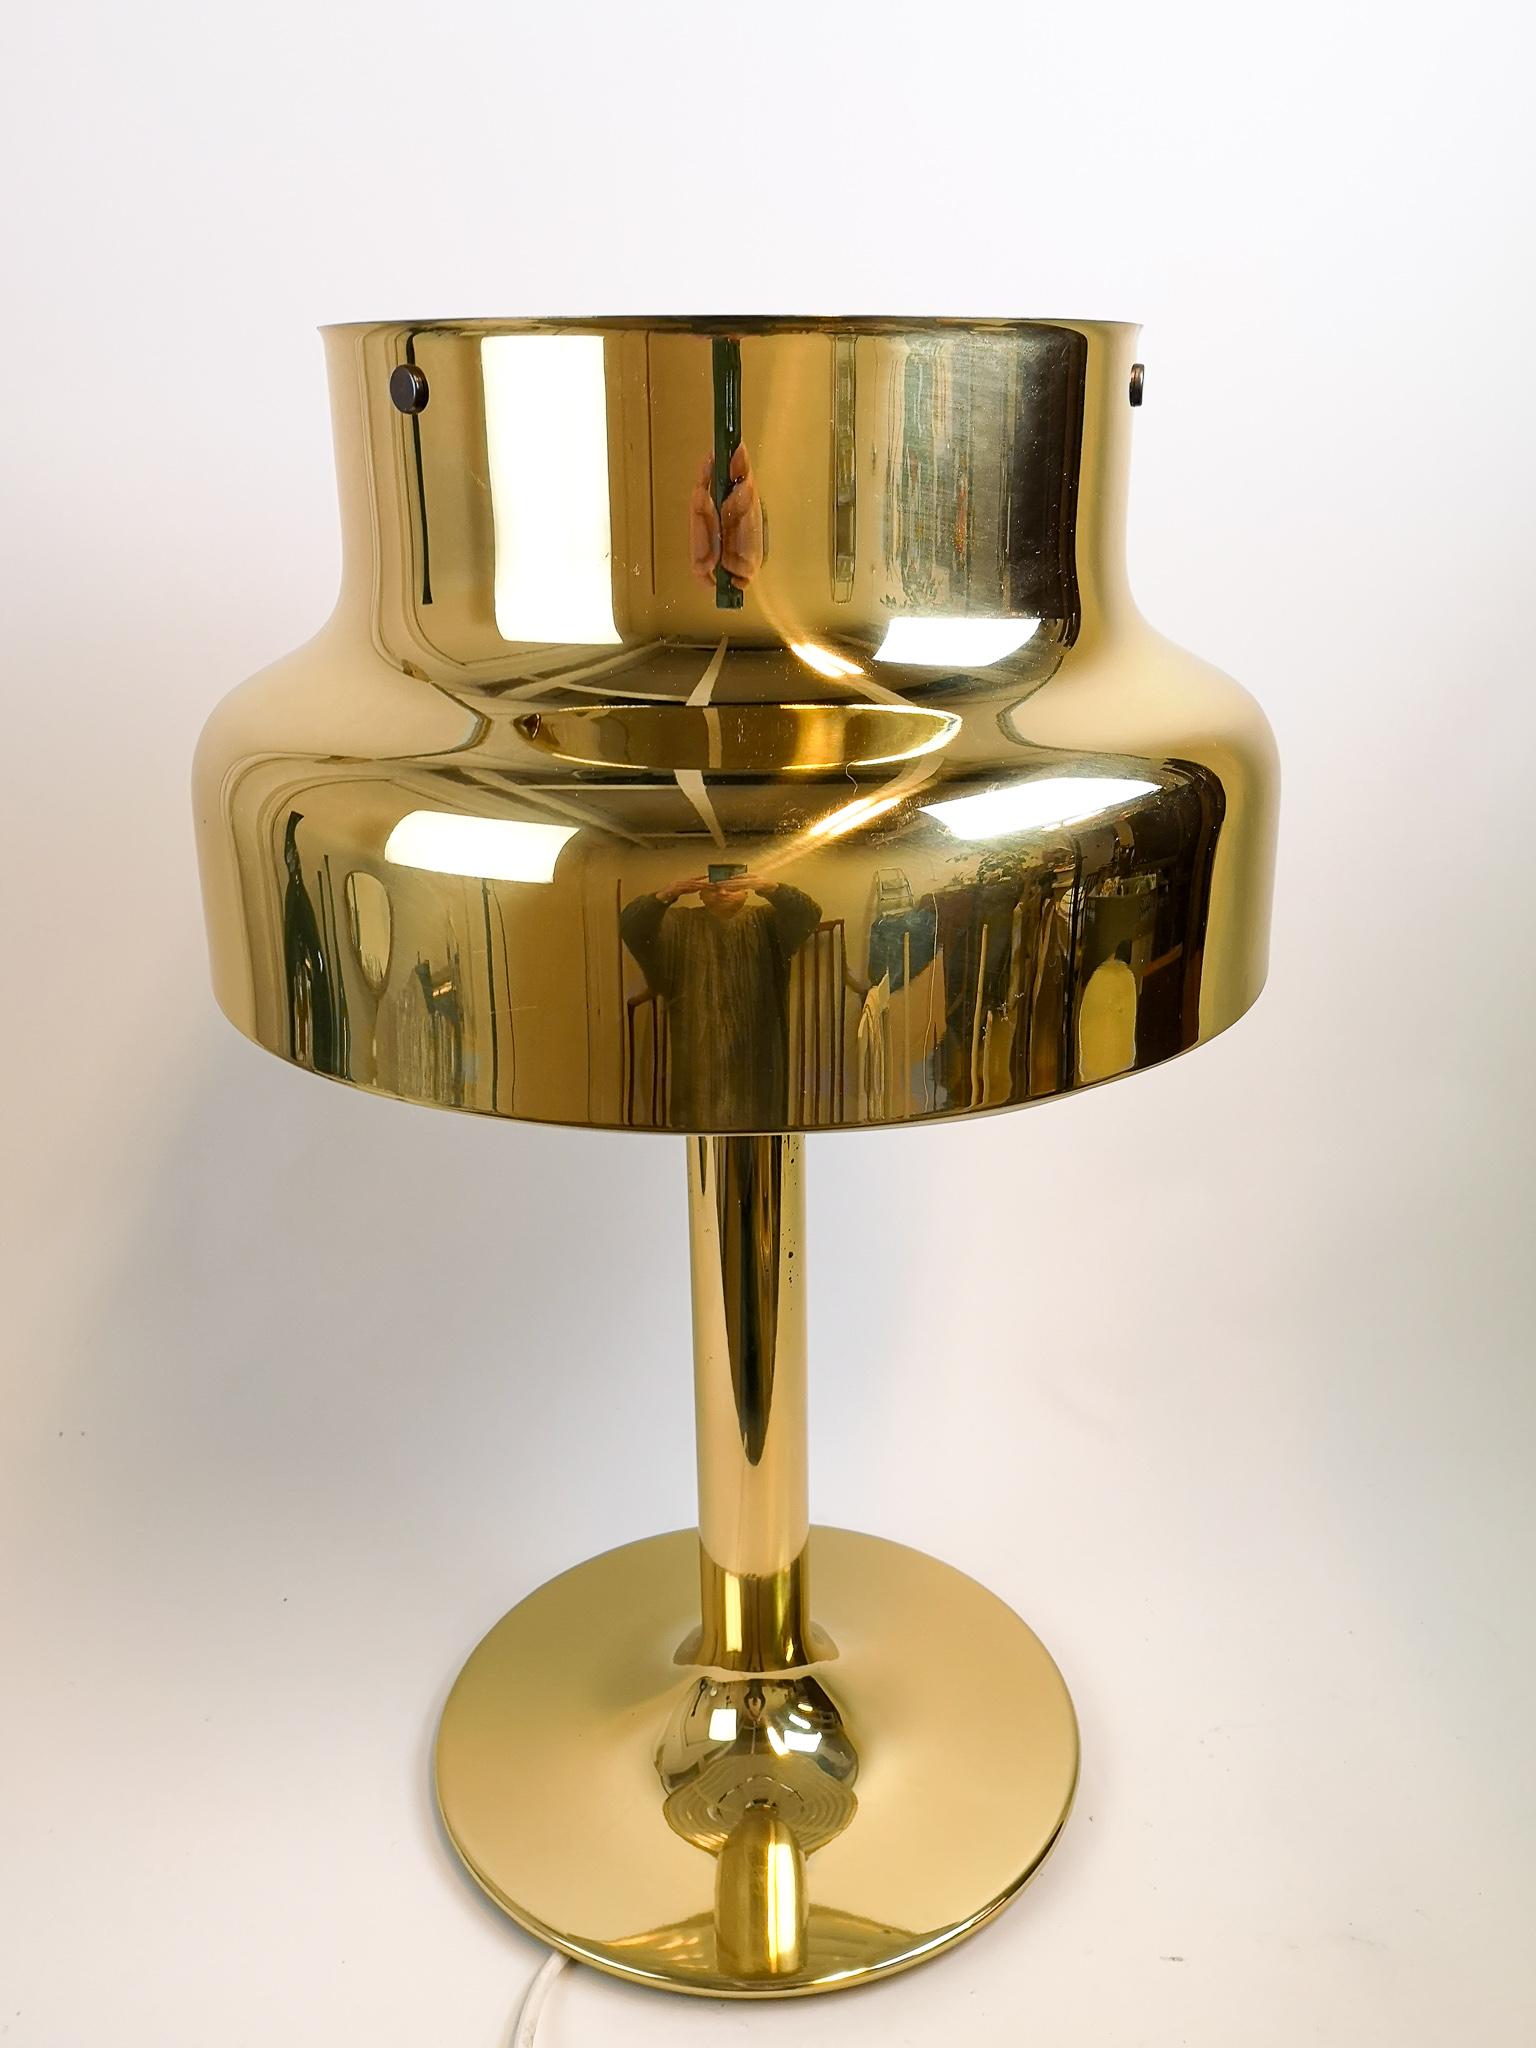 Scandinavian Modern Midcentury Large Table Lamp Bumling by Anders Pehrson for Ateljé Lyktan, 1960s